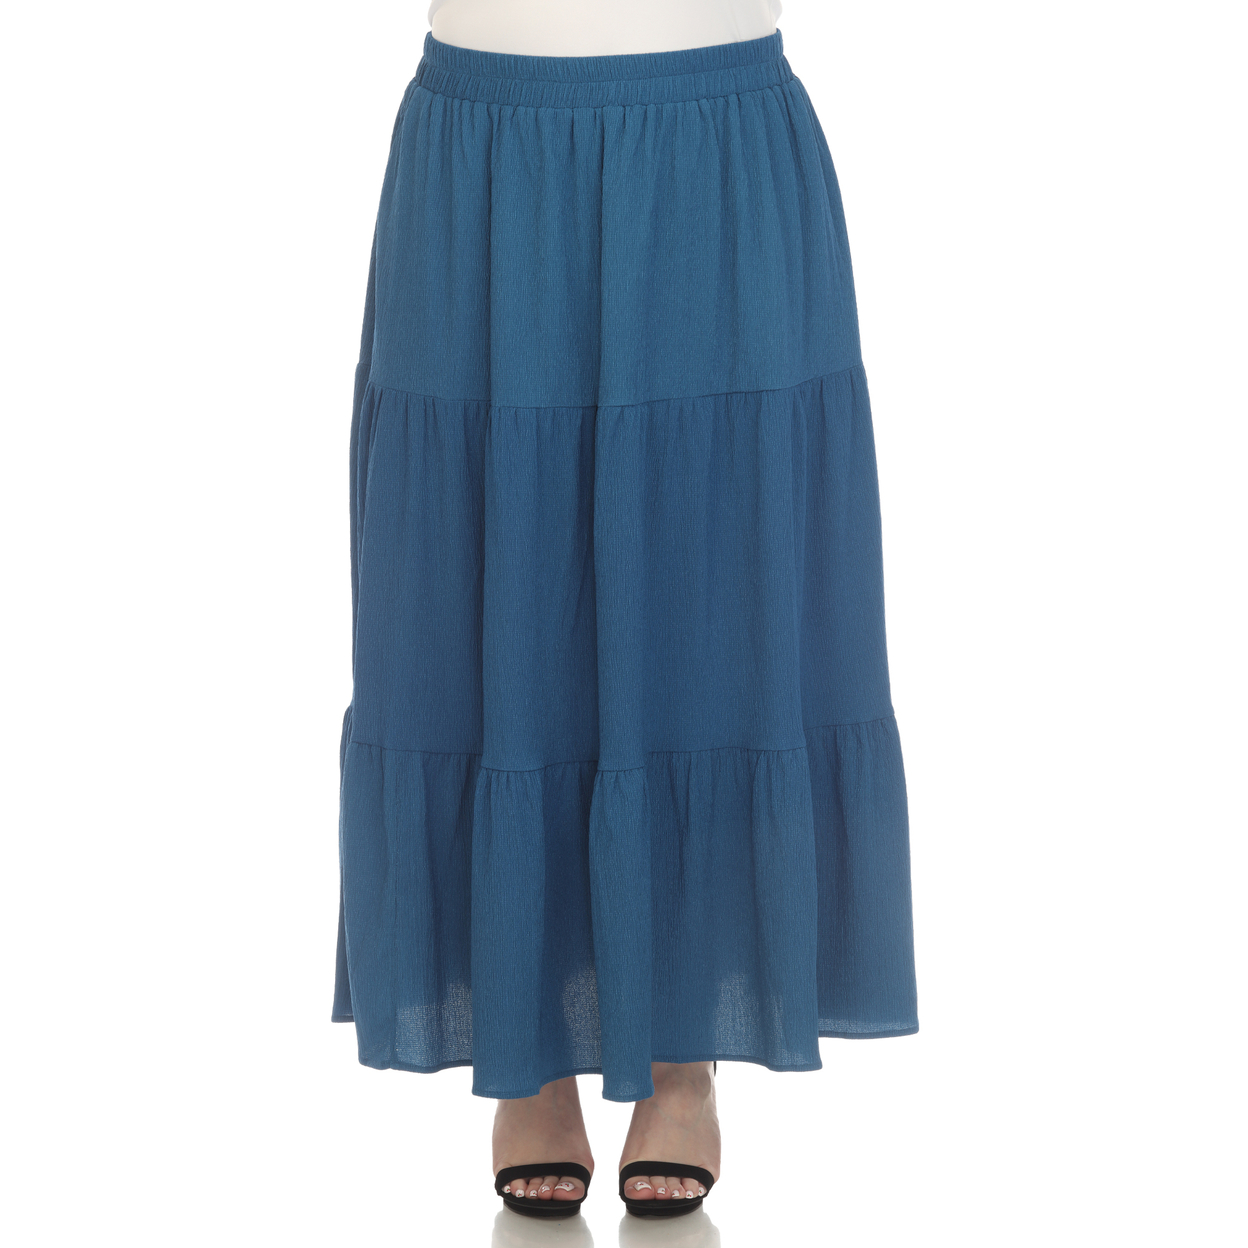 White Mark Women's Pleated Tiered Maxi Skirt - Royal, 1x